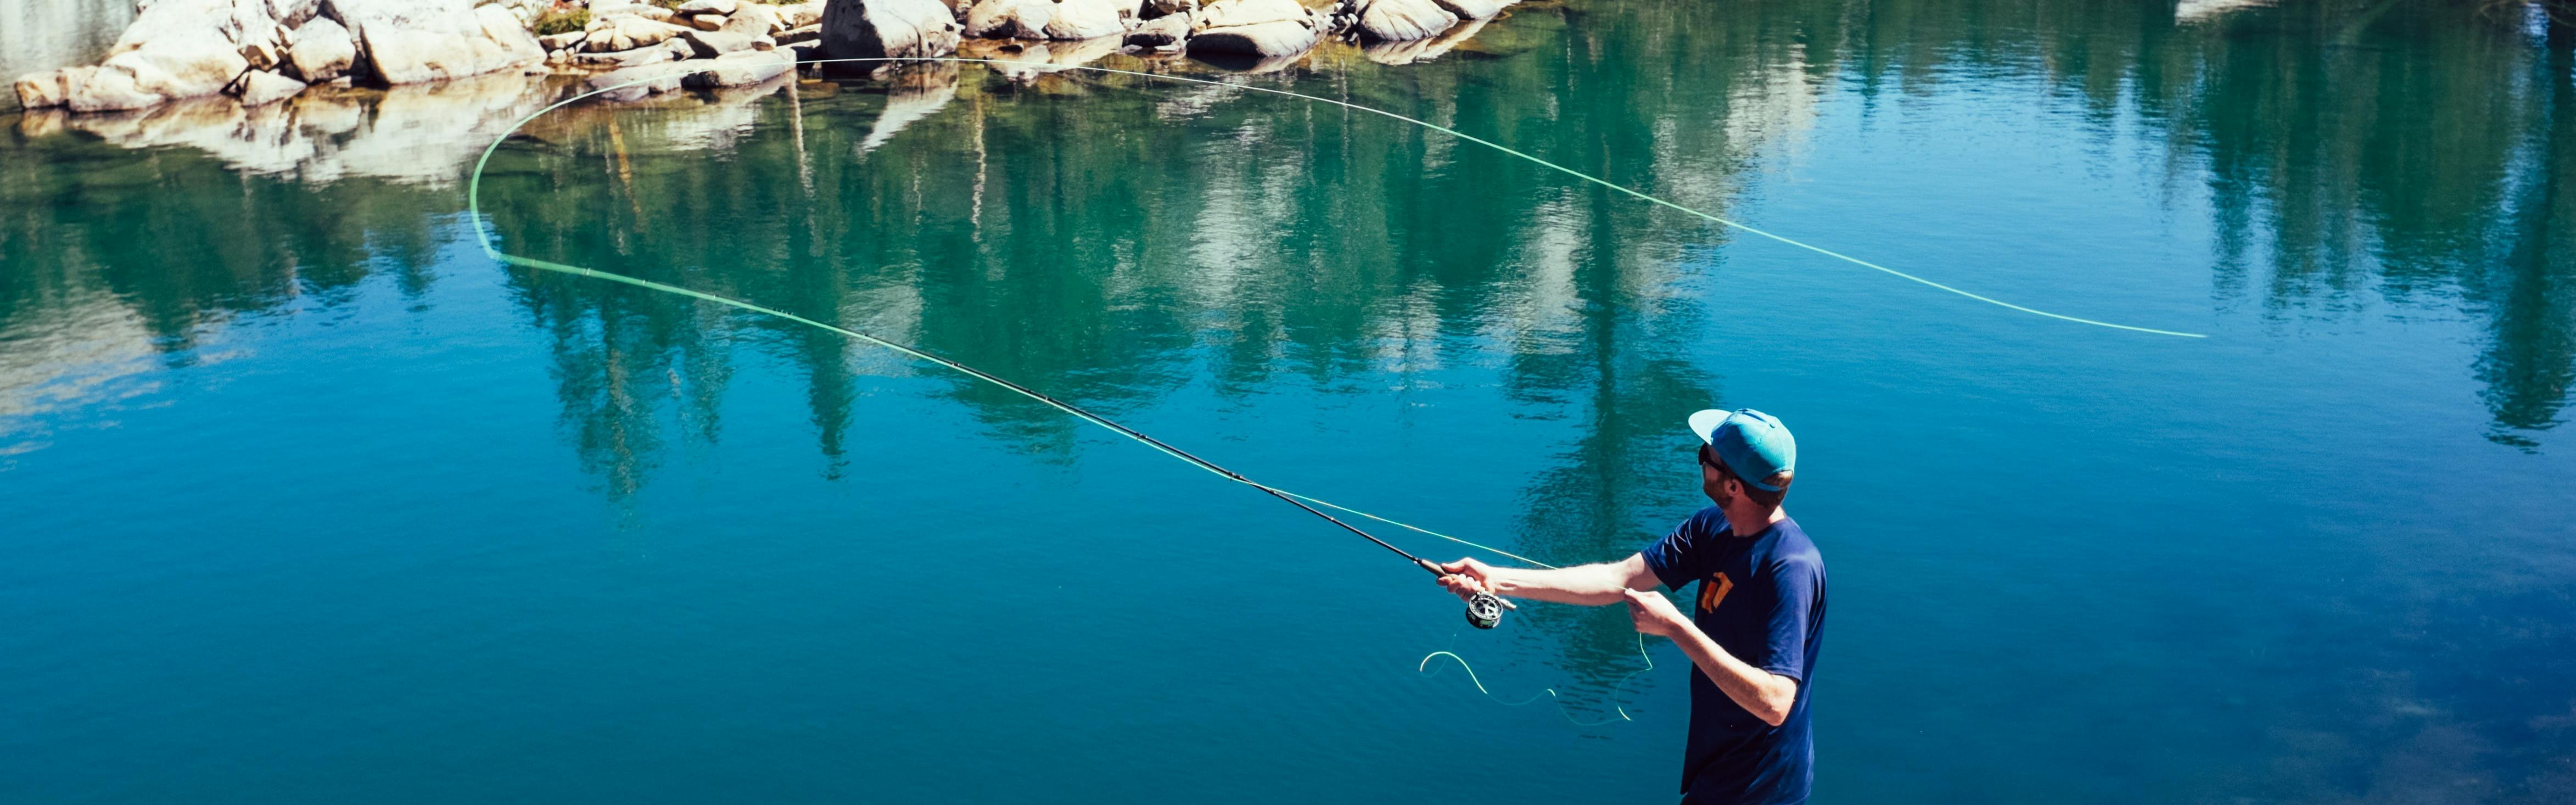 A man casts a fly fishing rod over bright blue water.